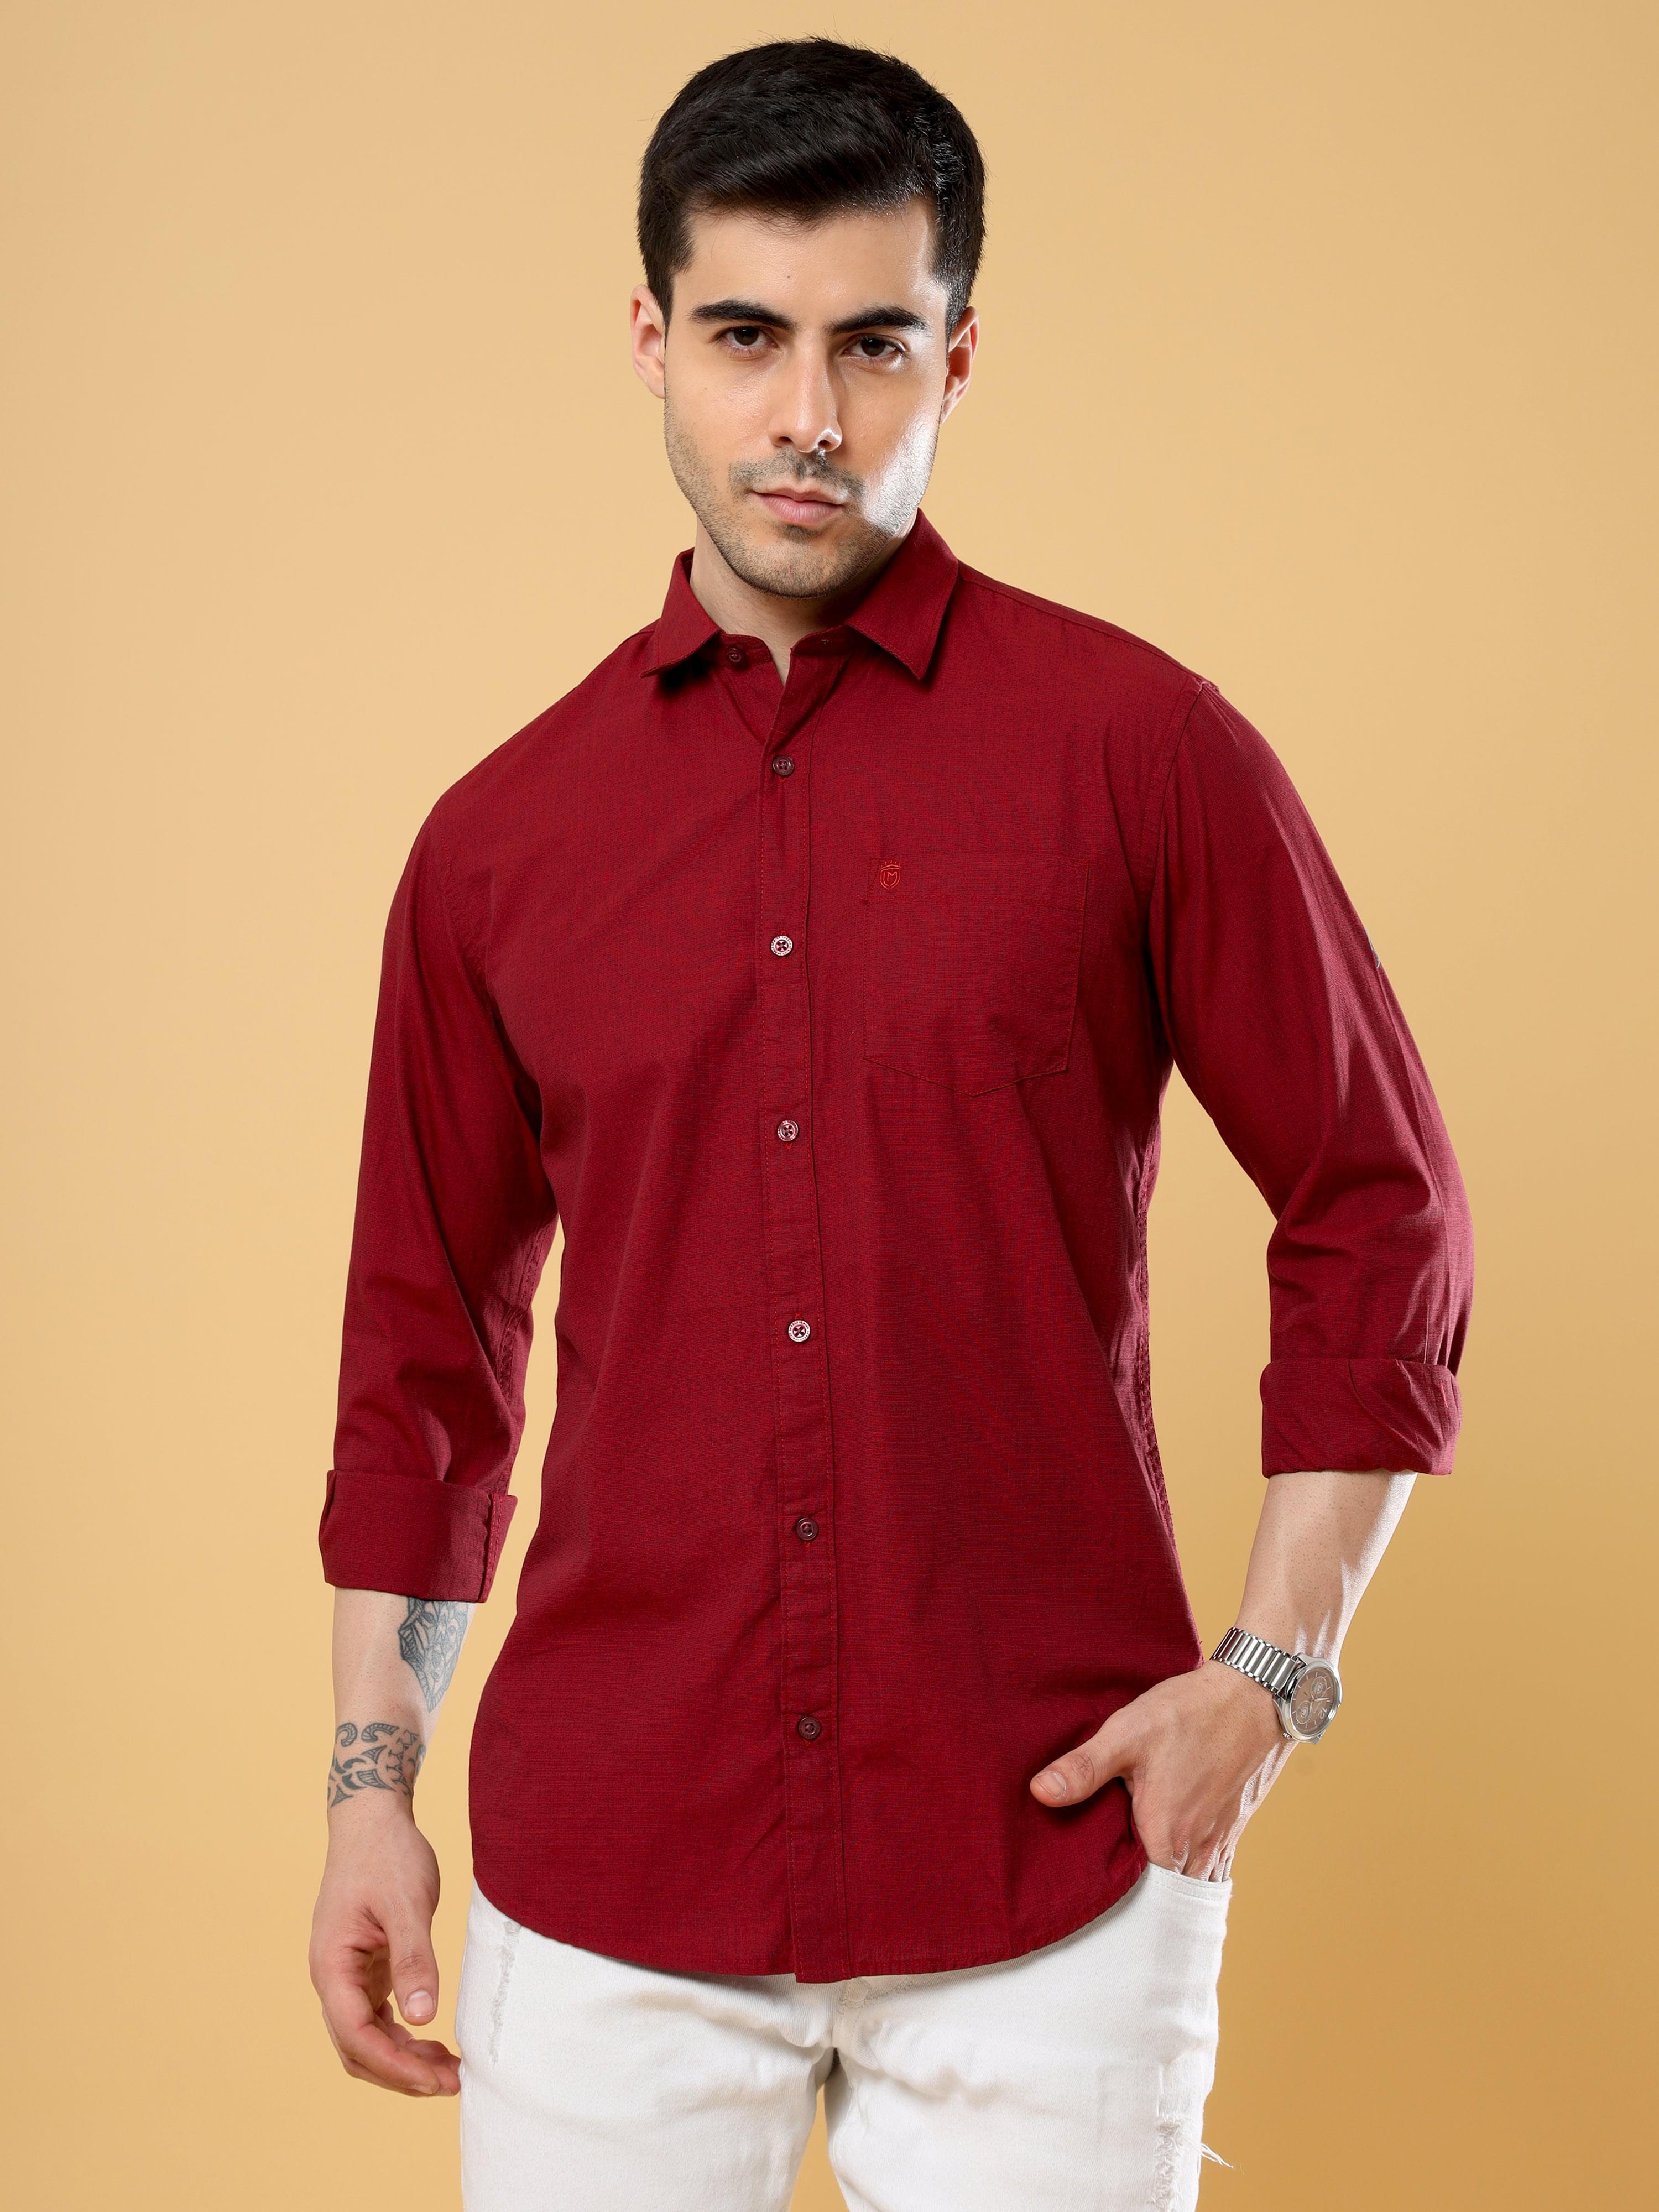 Shop Stylish Plain Maroon Shirt Online At Great PriceRs. 1039.00